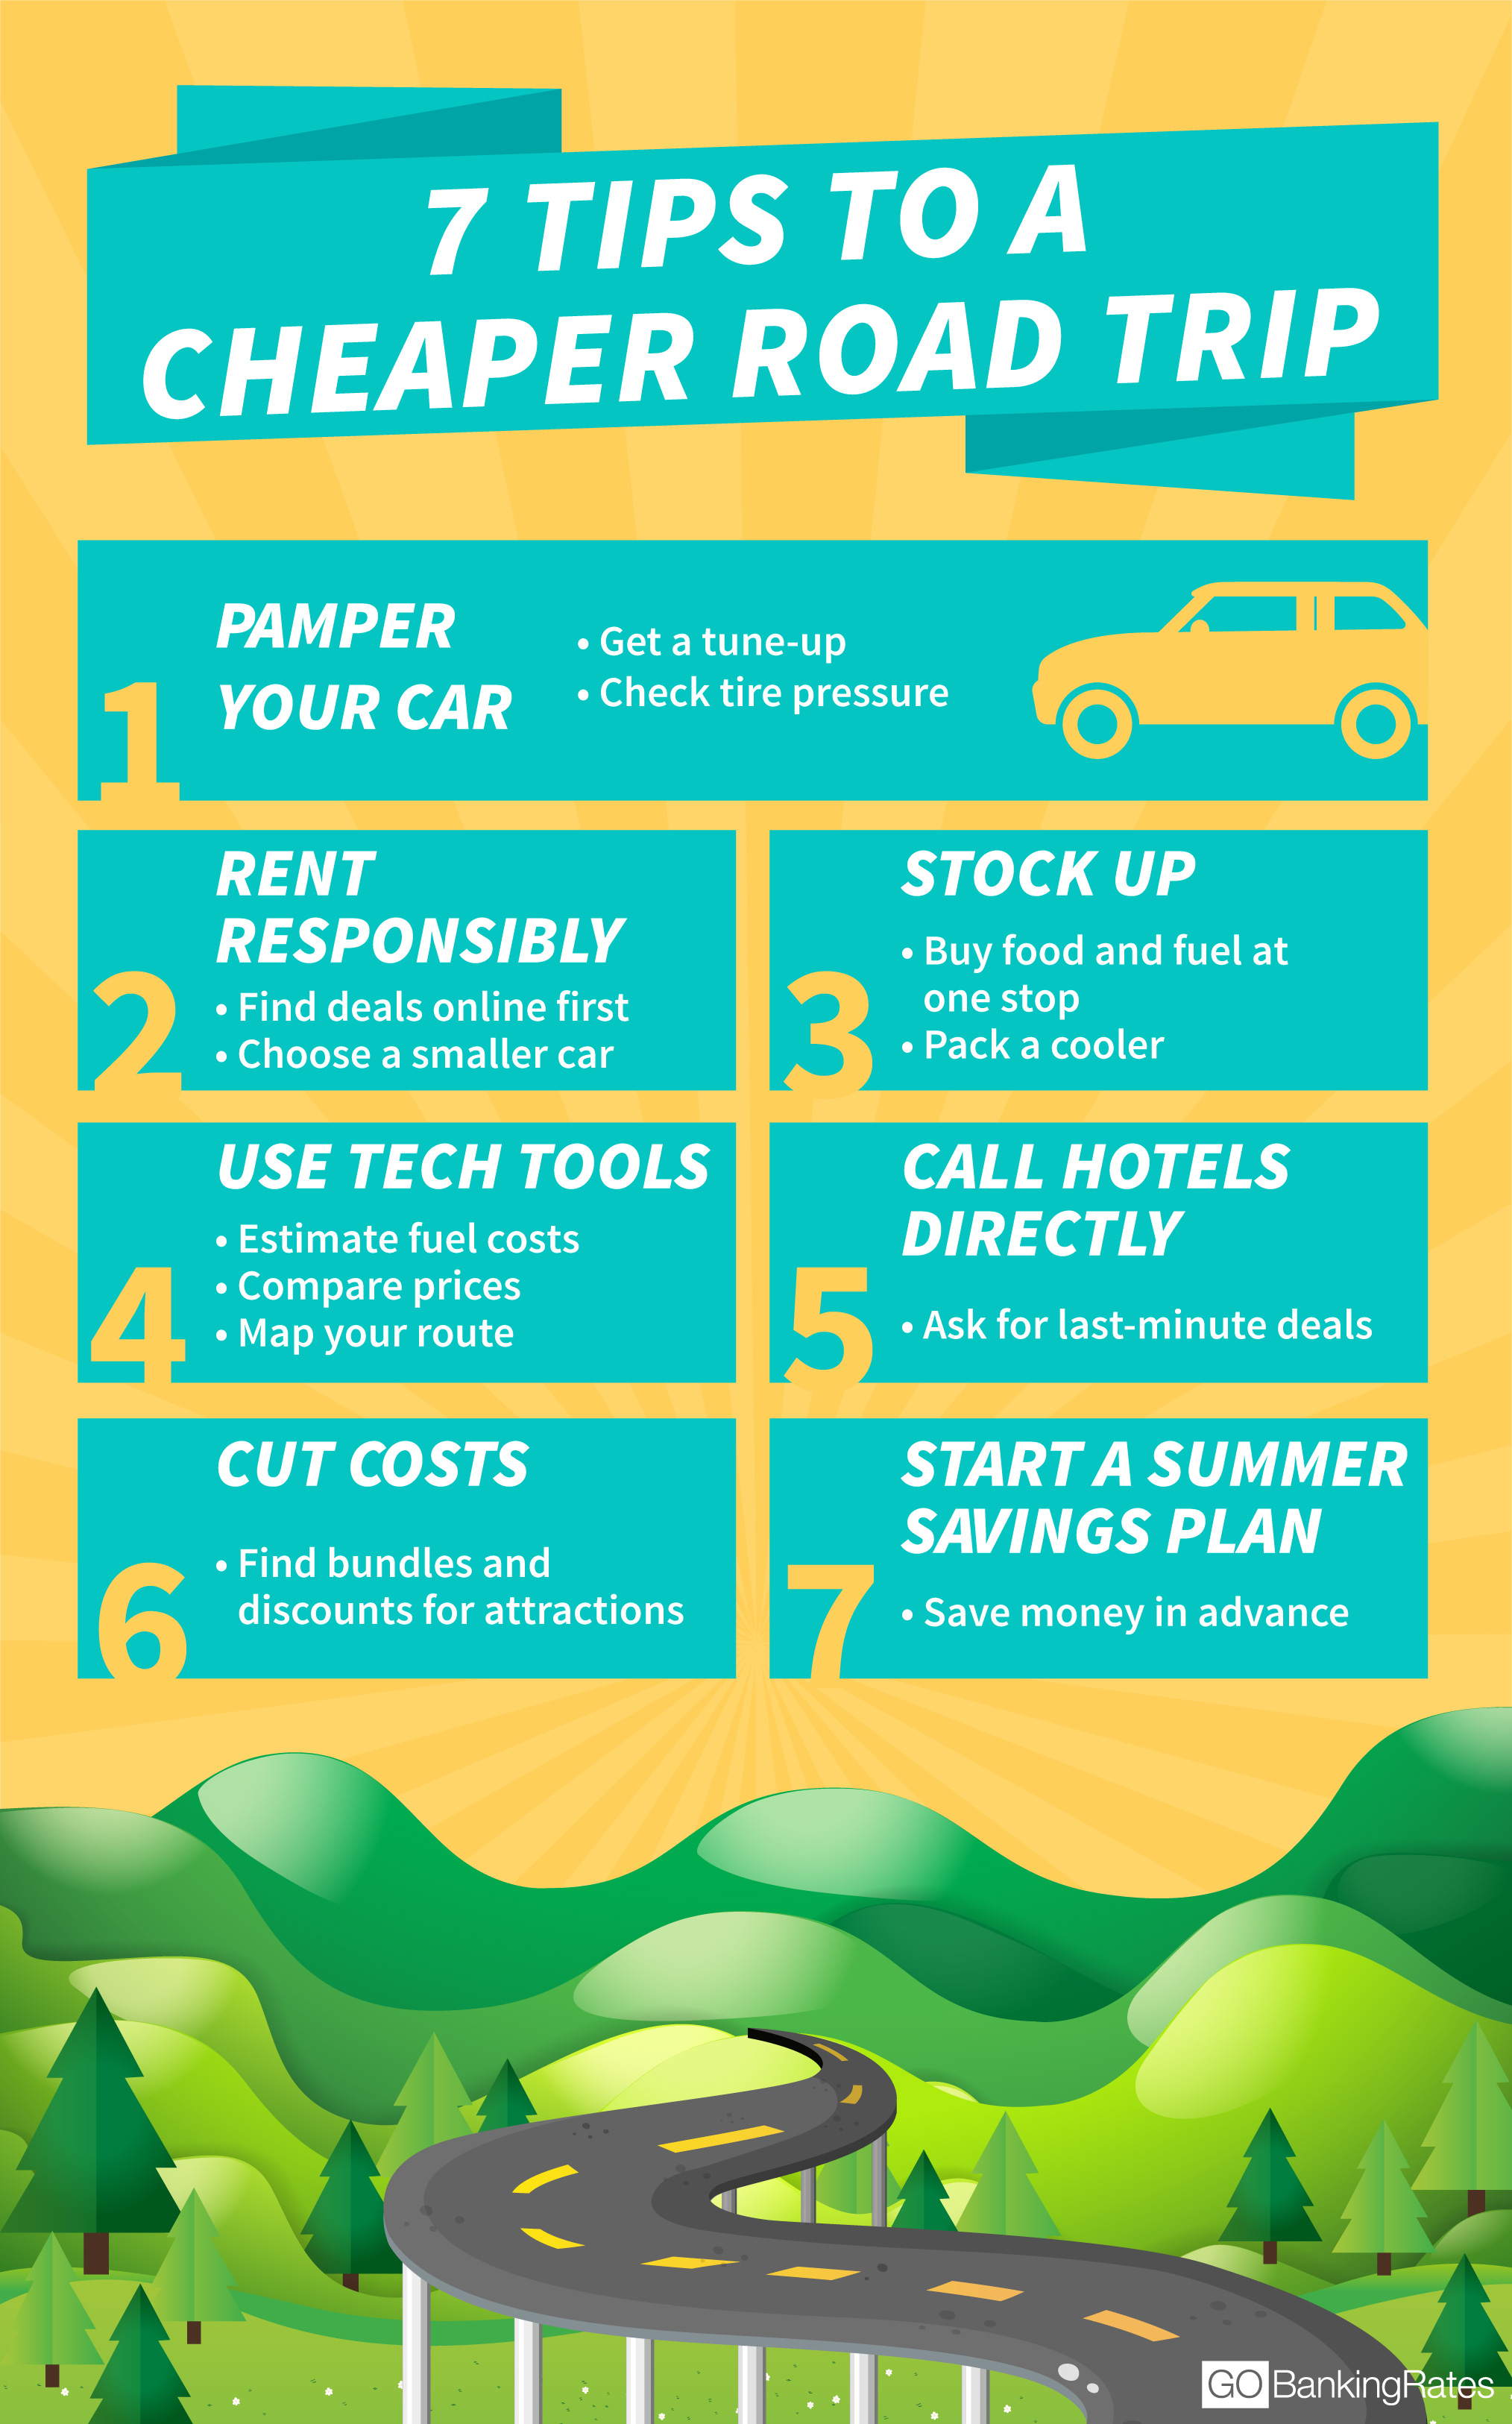 7 Money-Saving Tips for Your Summer Road Trip